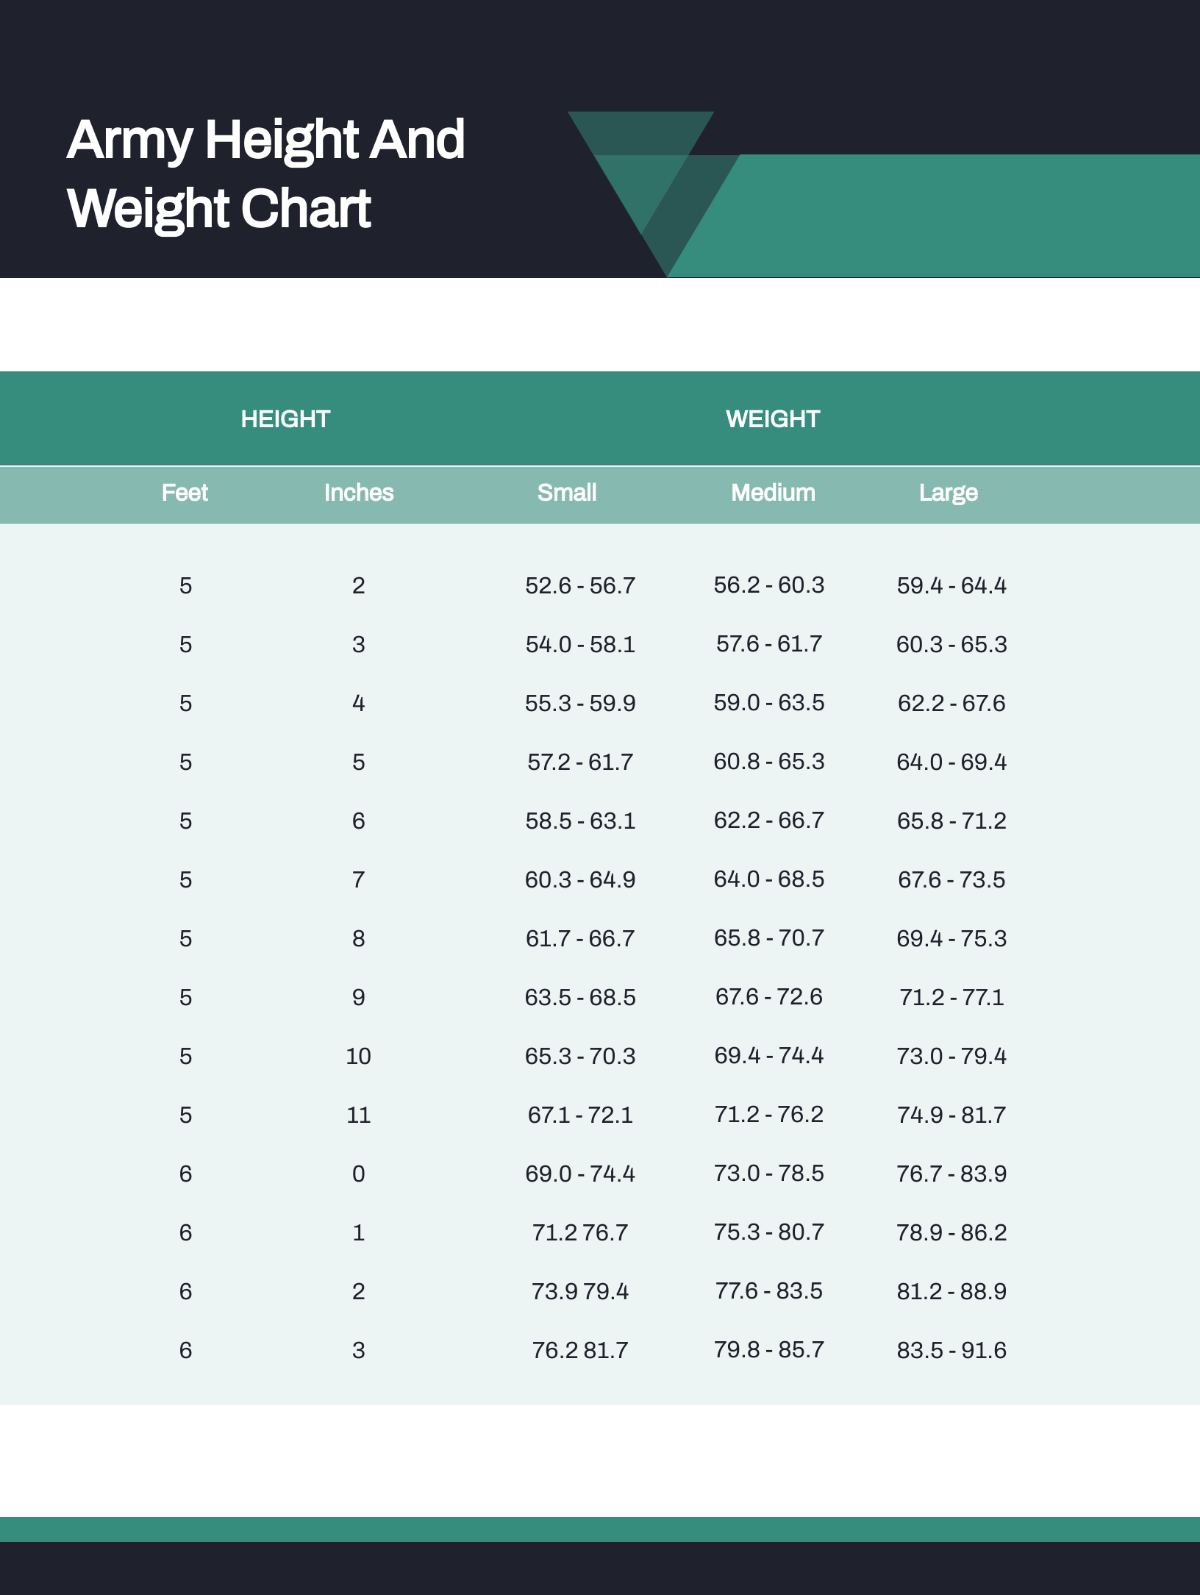 Army Height and Weight Chart Template